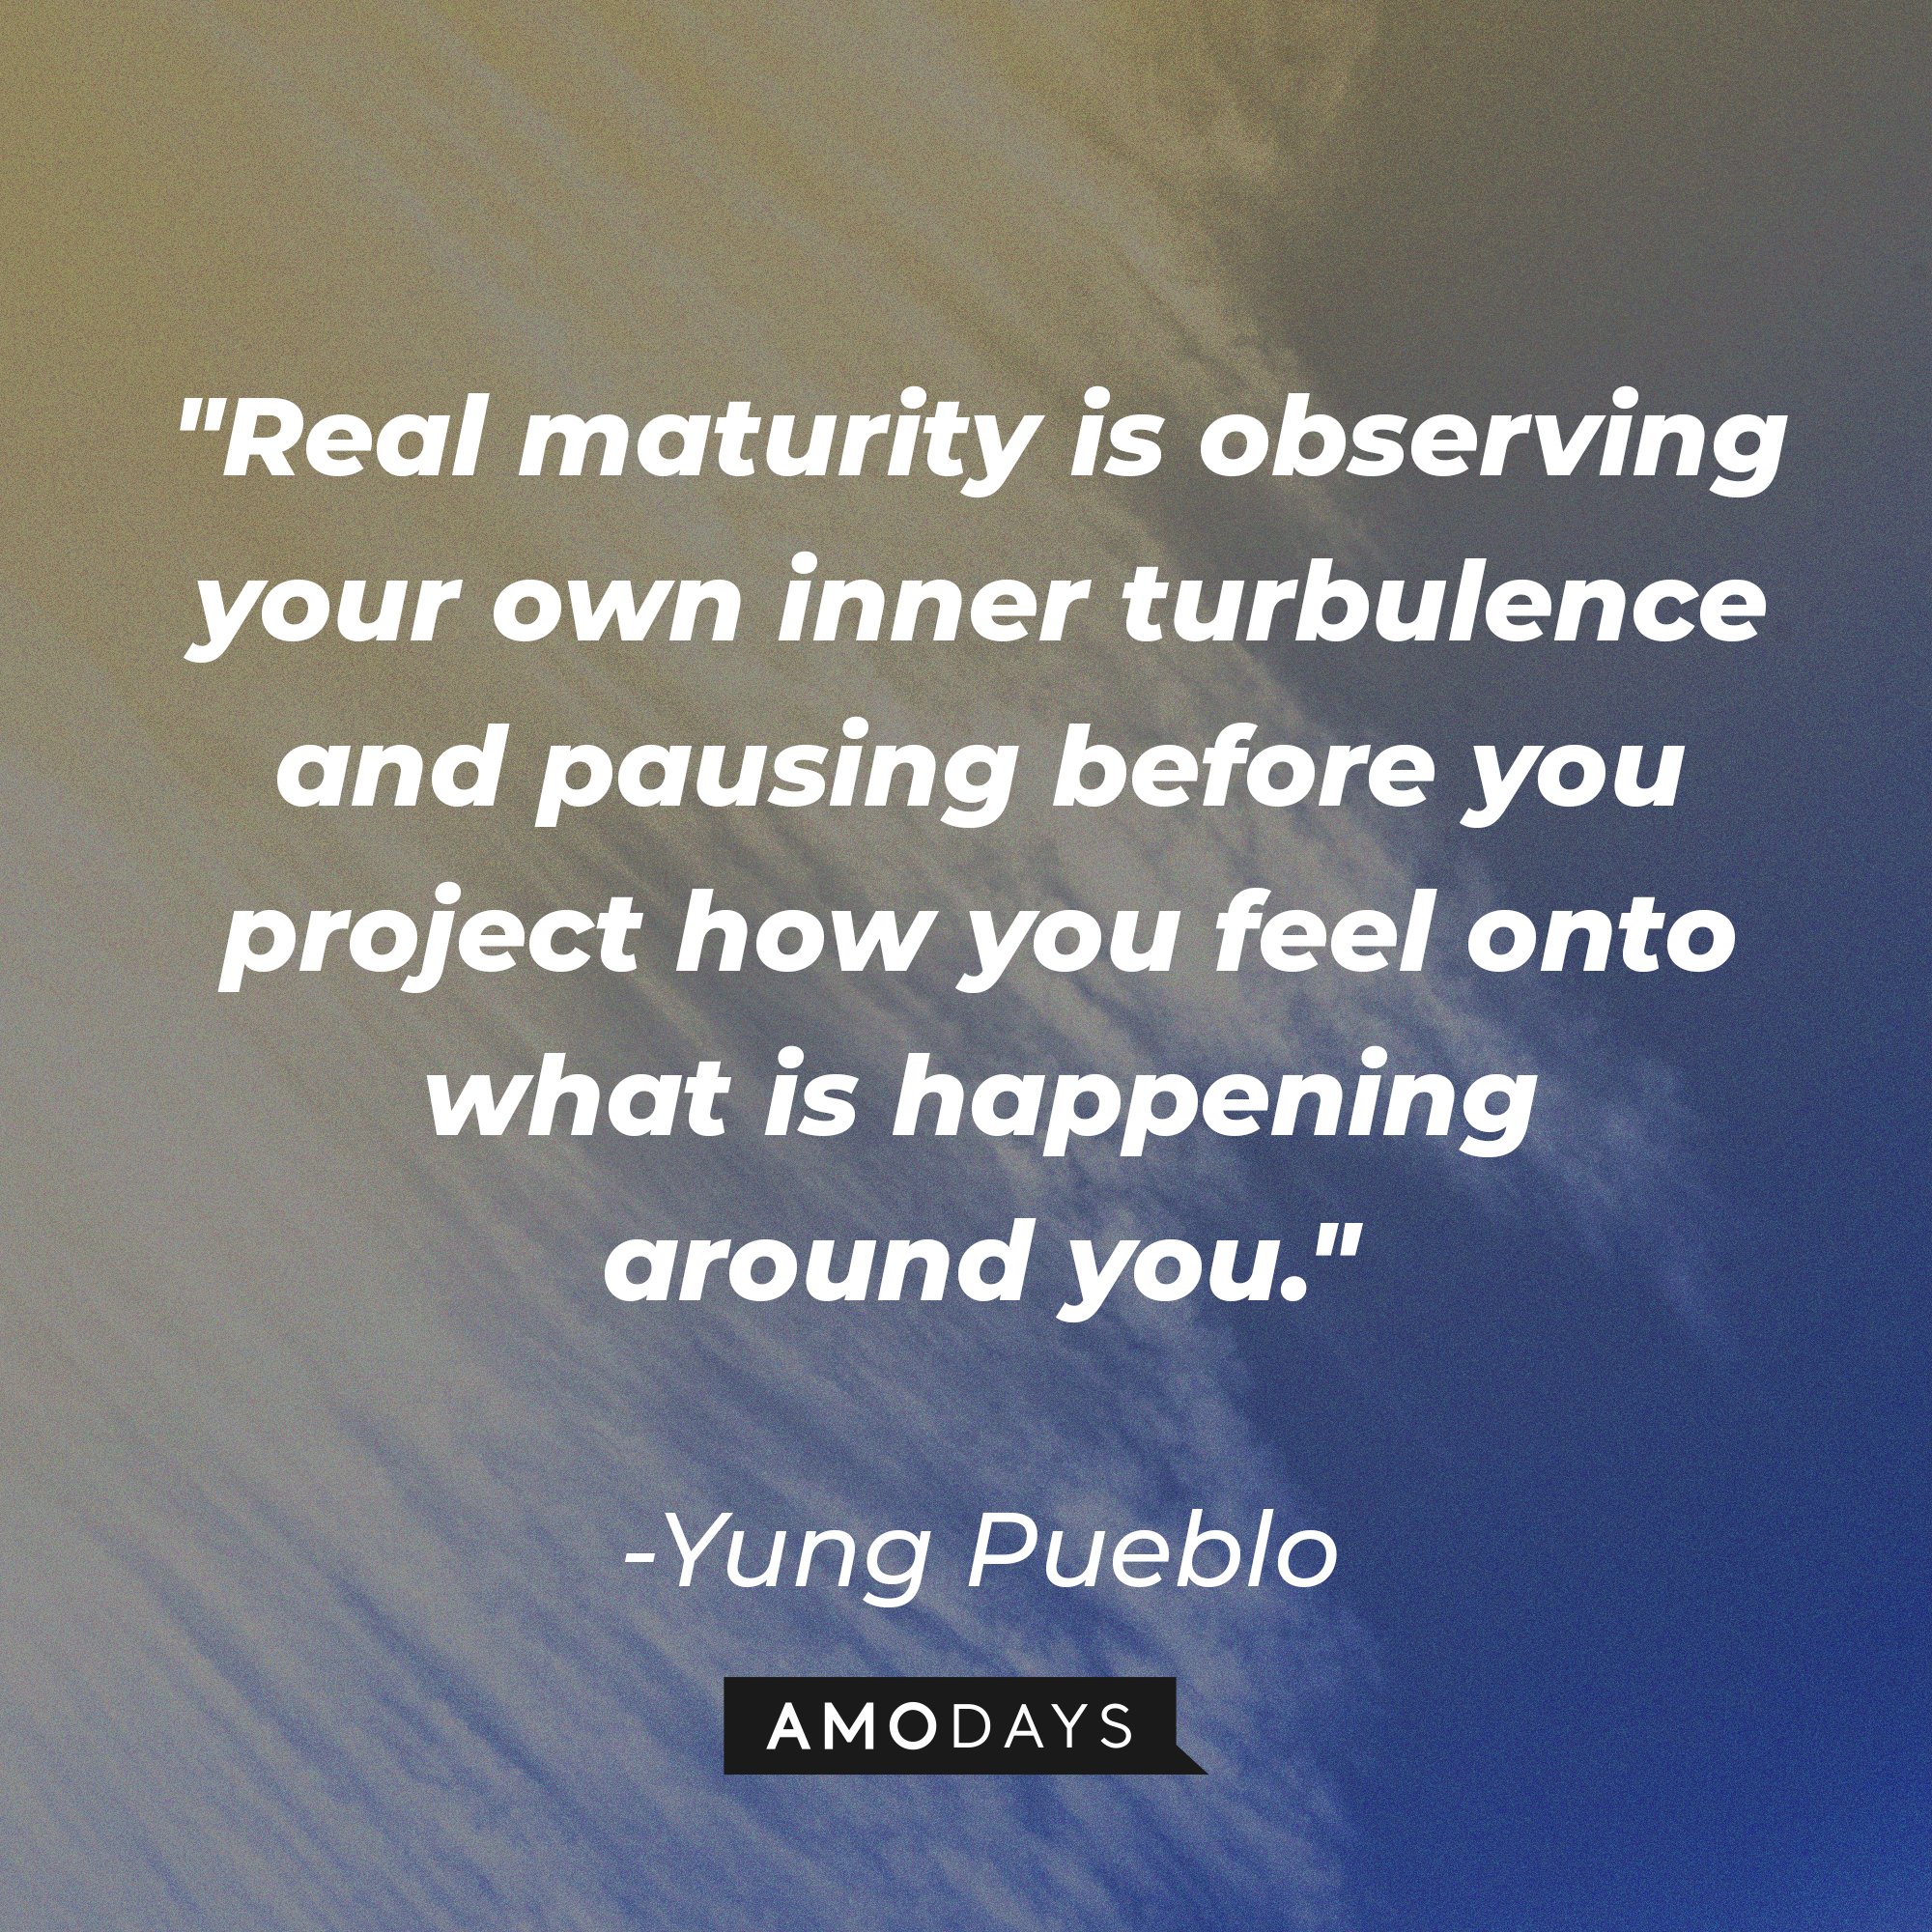 Yung Pueblo's quote "Real maturity is observing your own inner turbulence and pausing before you project how you feel onto what is happening around you." | Source: Unsplash.com